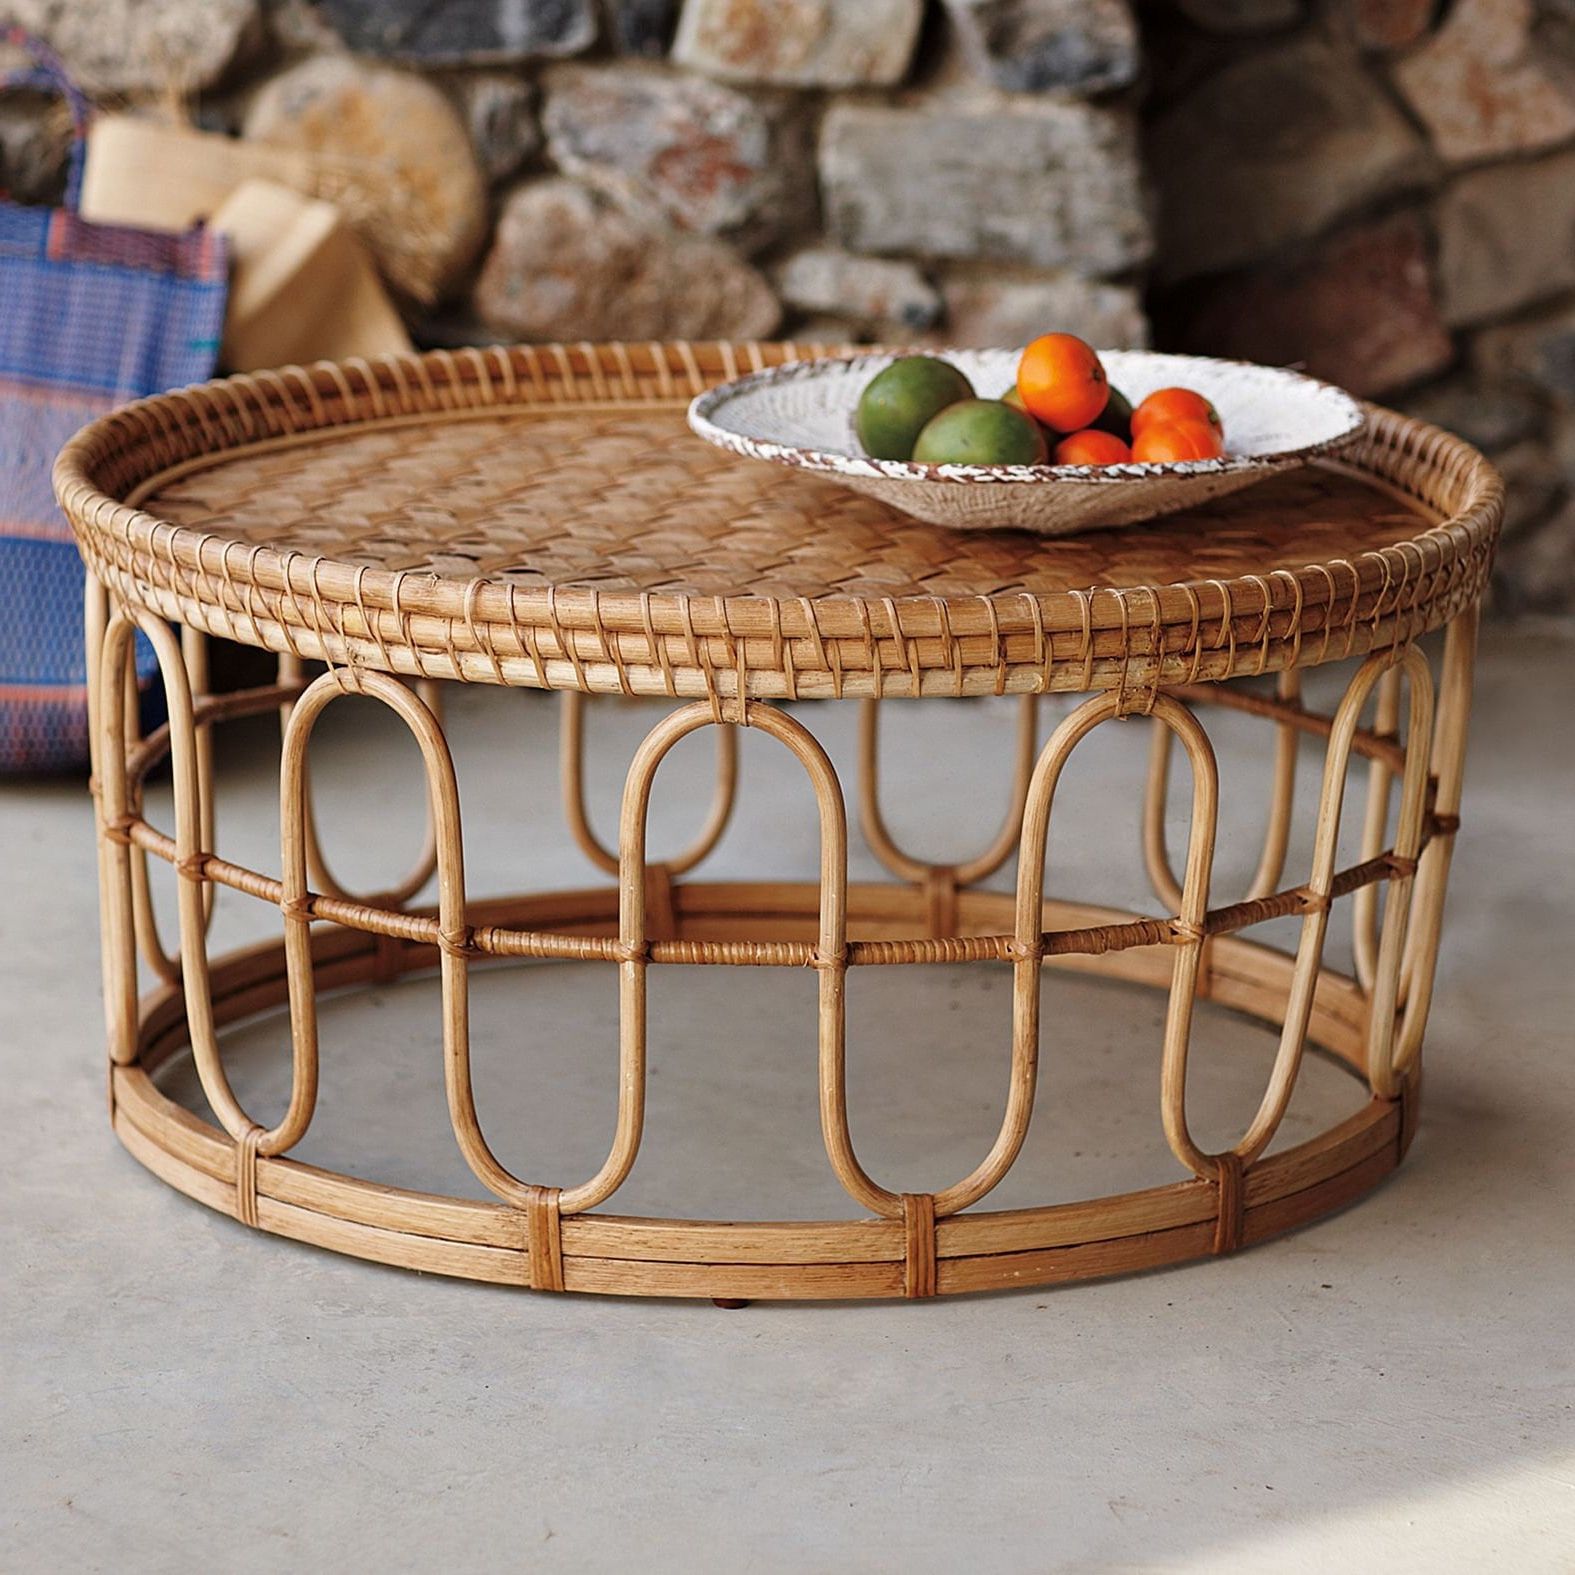 Recent Handmade Rattan Table, Wicker Table, Cane Table, Indoor Furniture, Home  Interior Design Table, Living Home Furniture, Coffee Table. – Etsy With Regard To Rattan Coffee Tables (Photo 5 of 10)